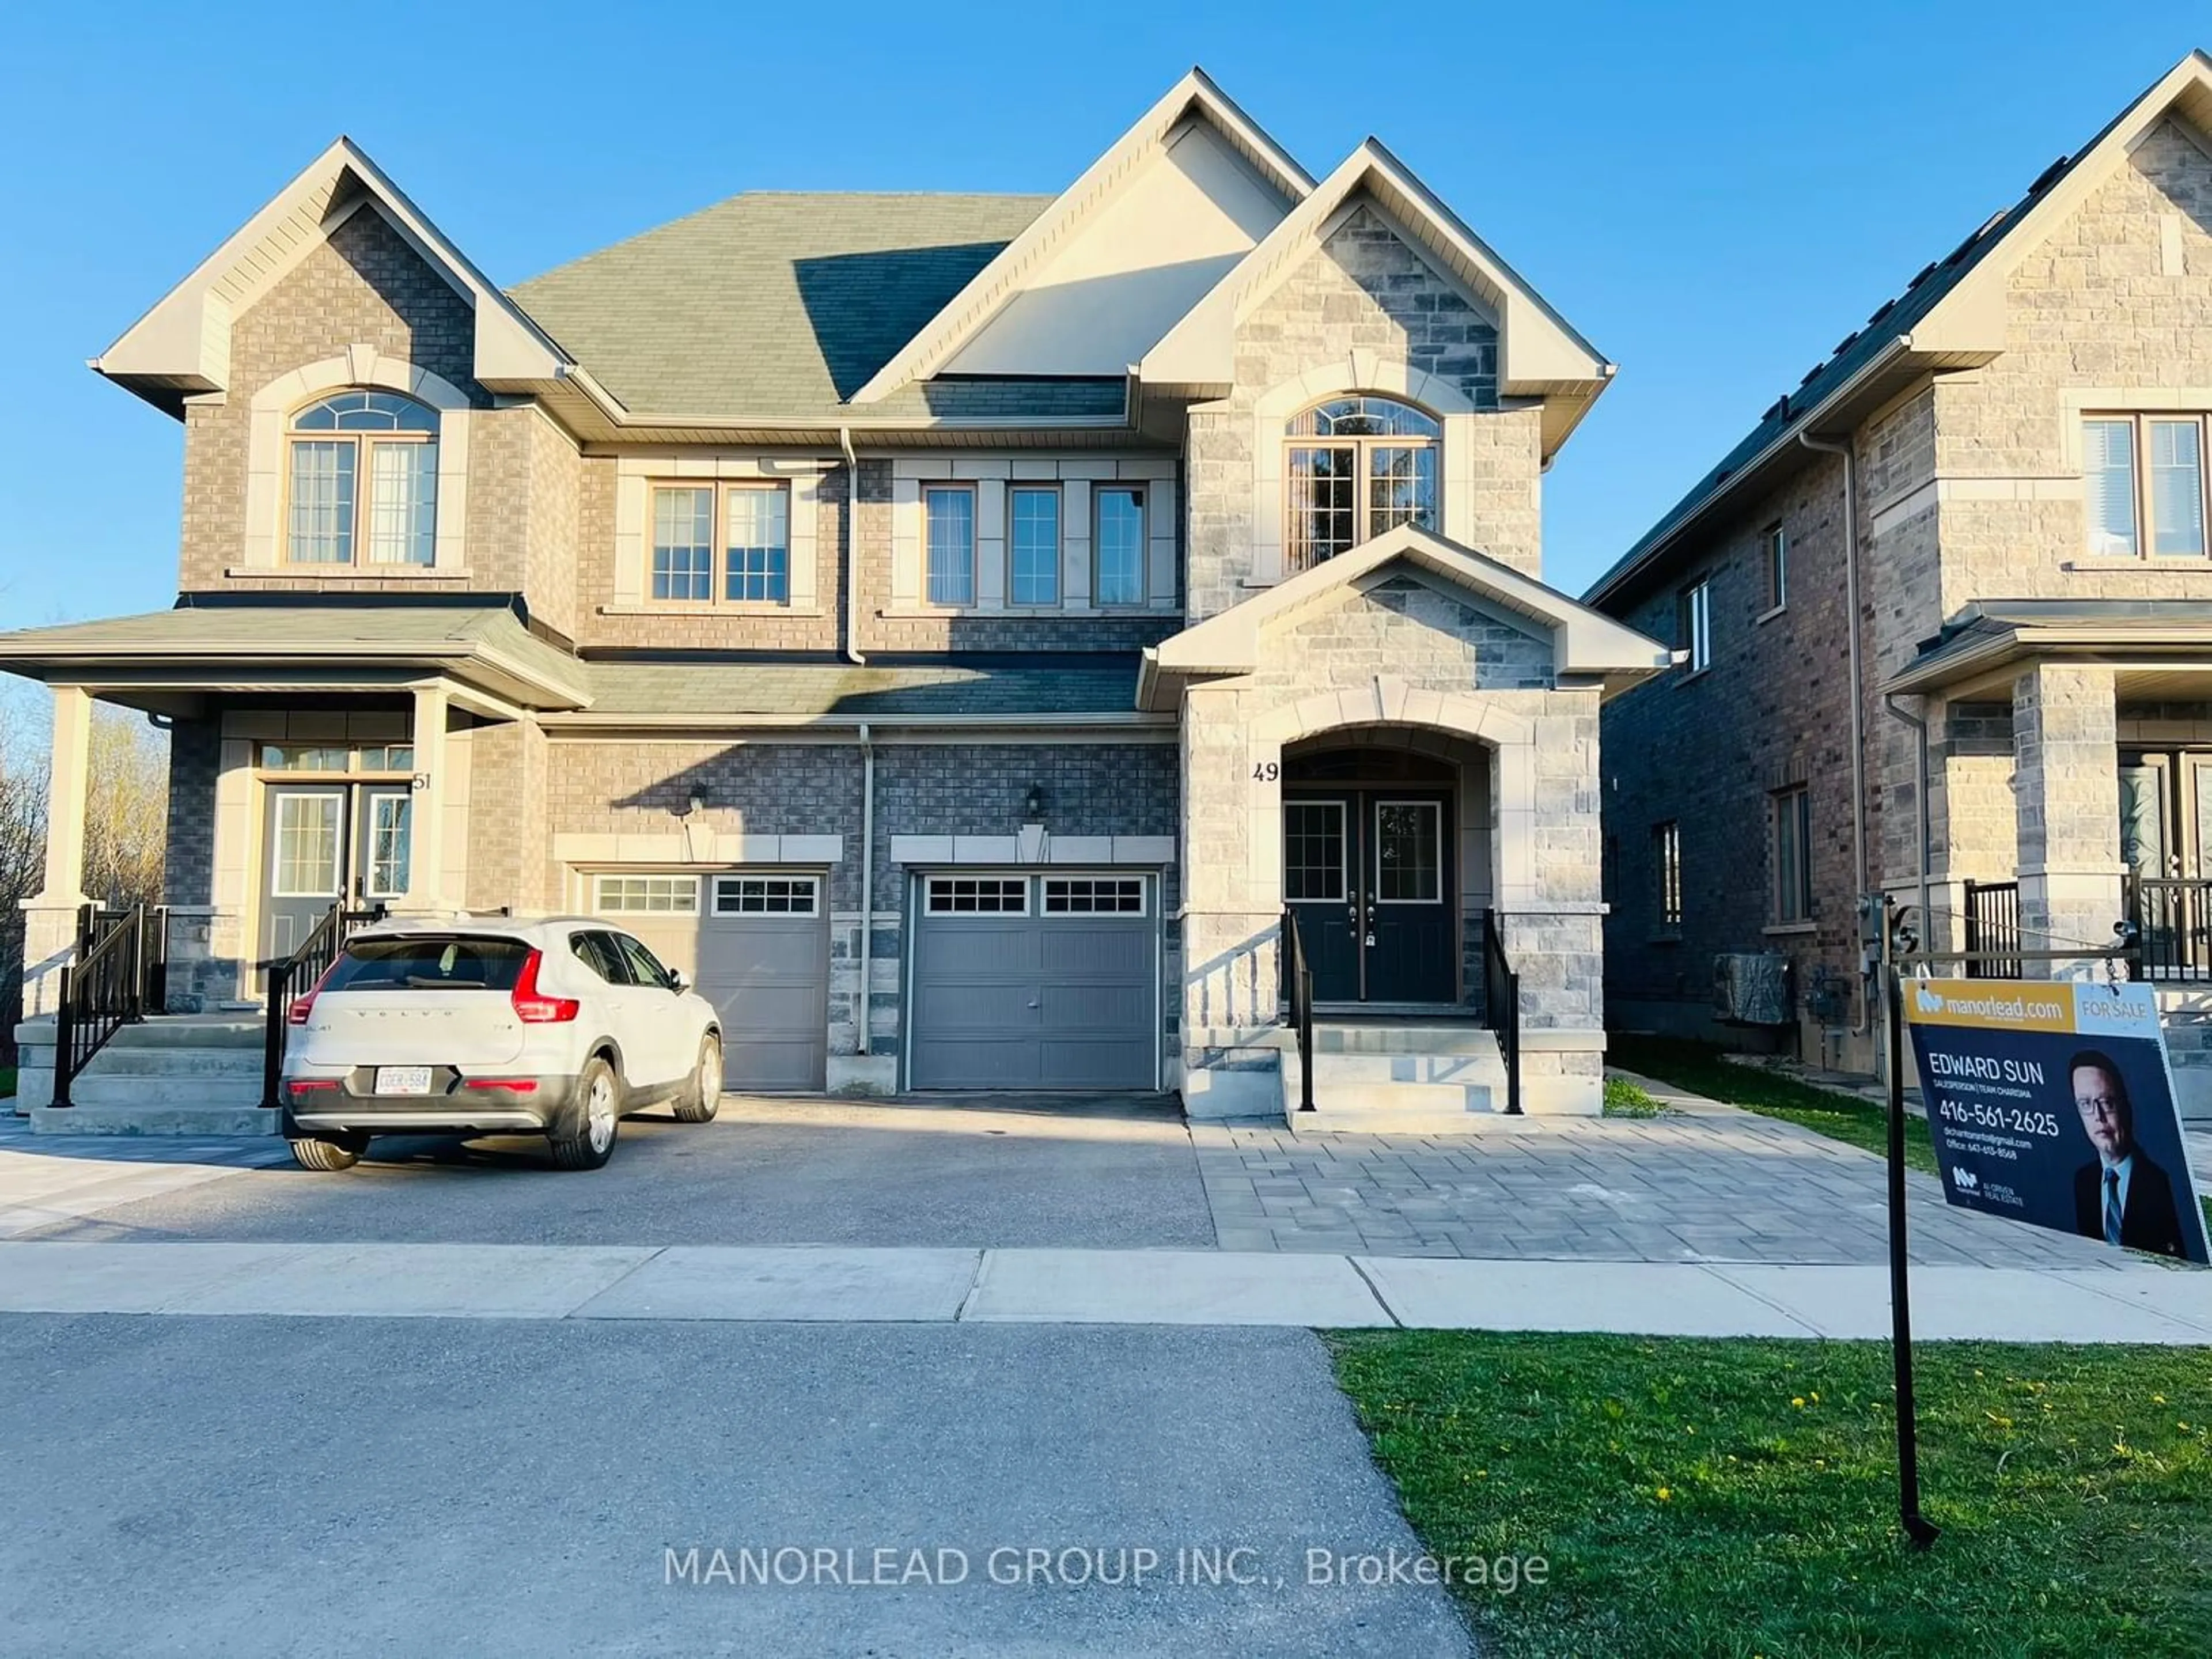 Home with brick exterior material for 49 Portage Ave, Richmond Hill Ontario L4E 2Z5